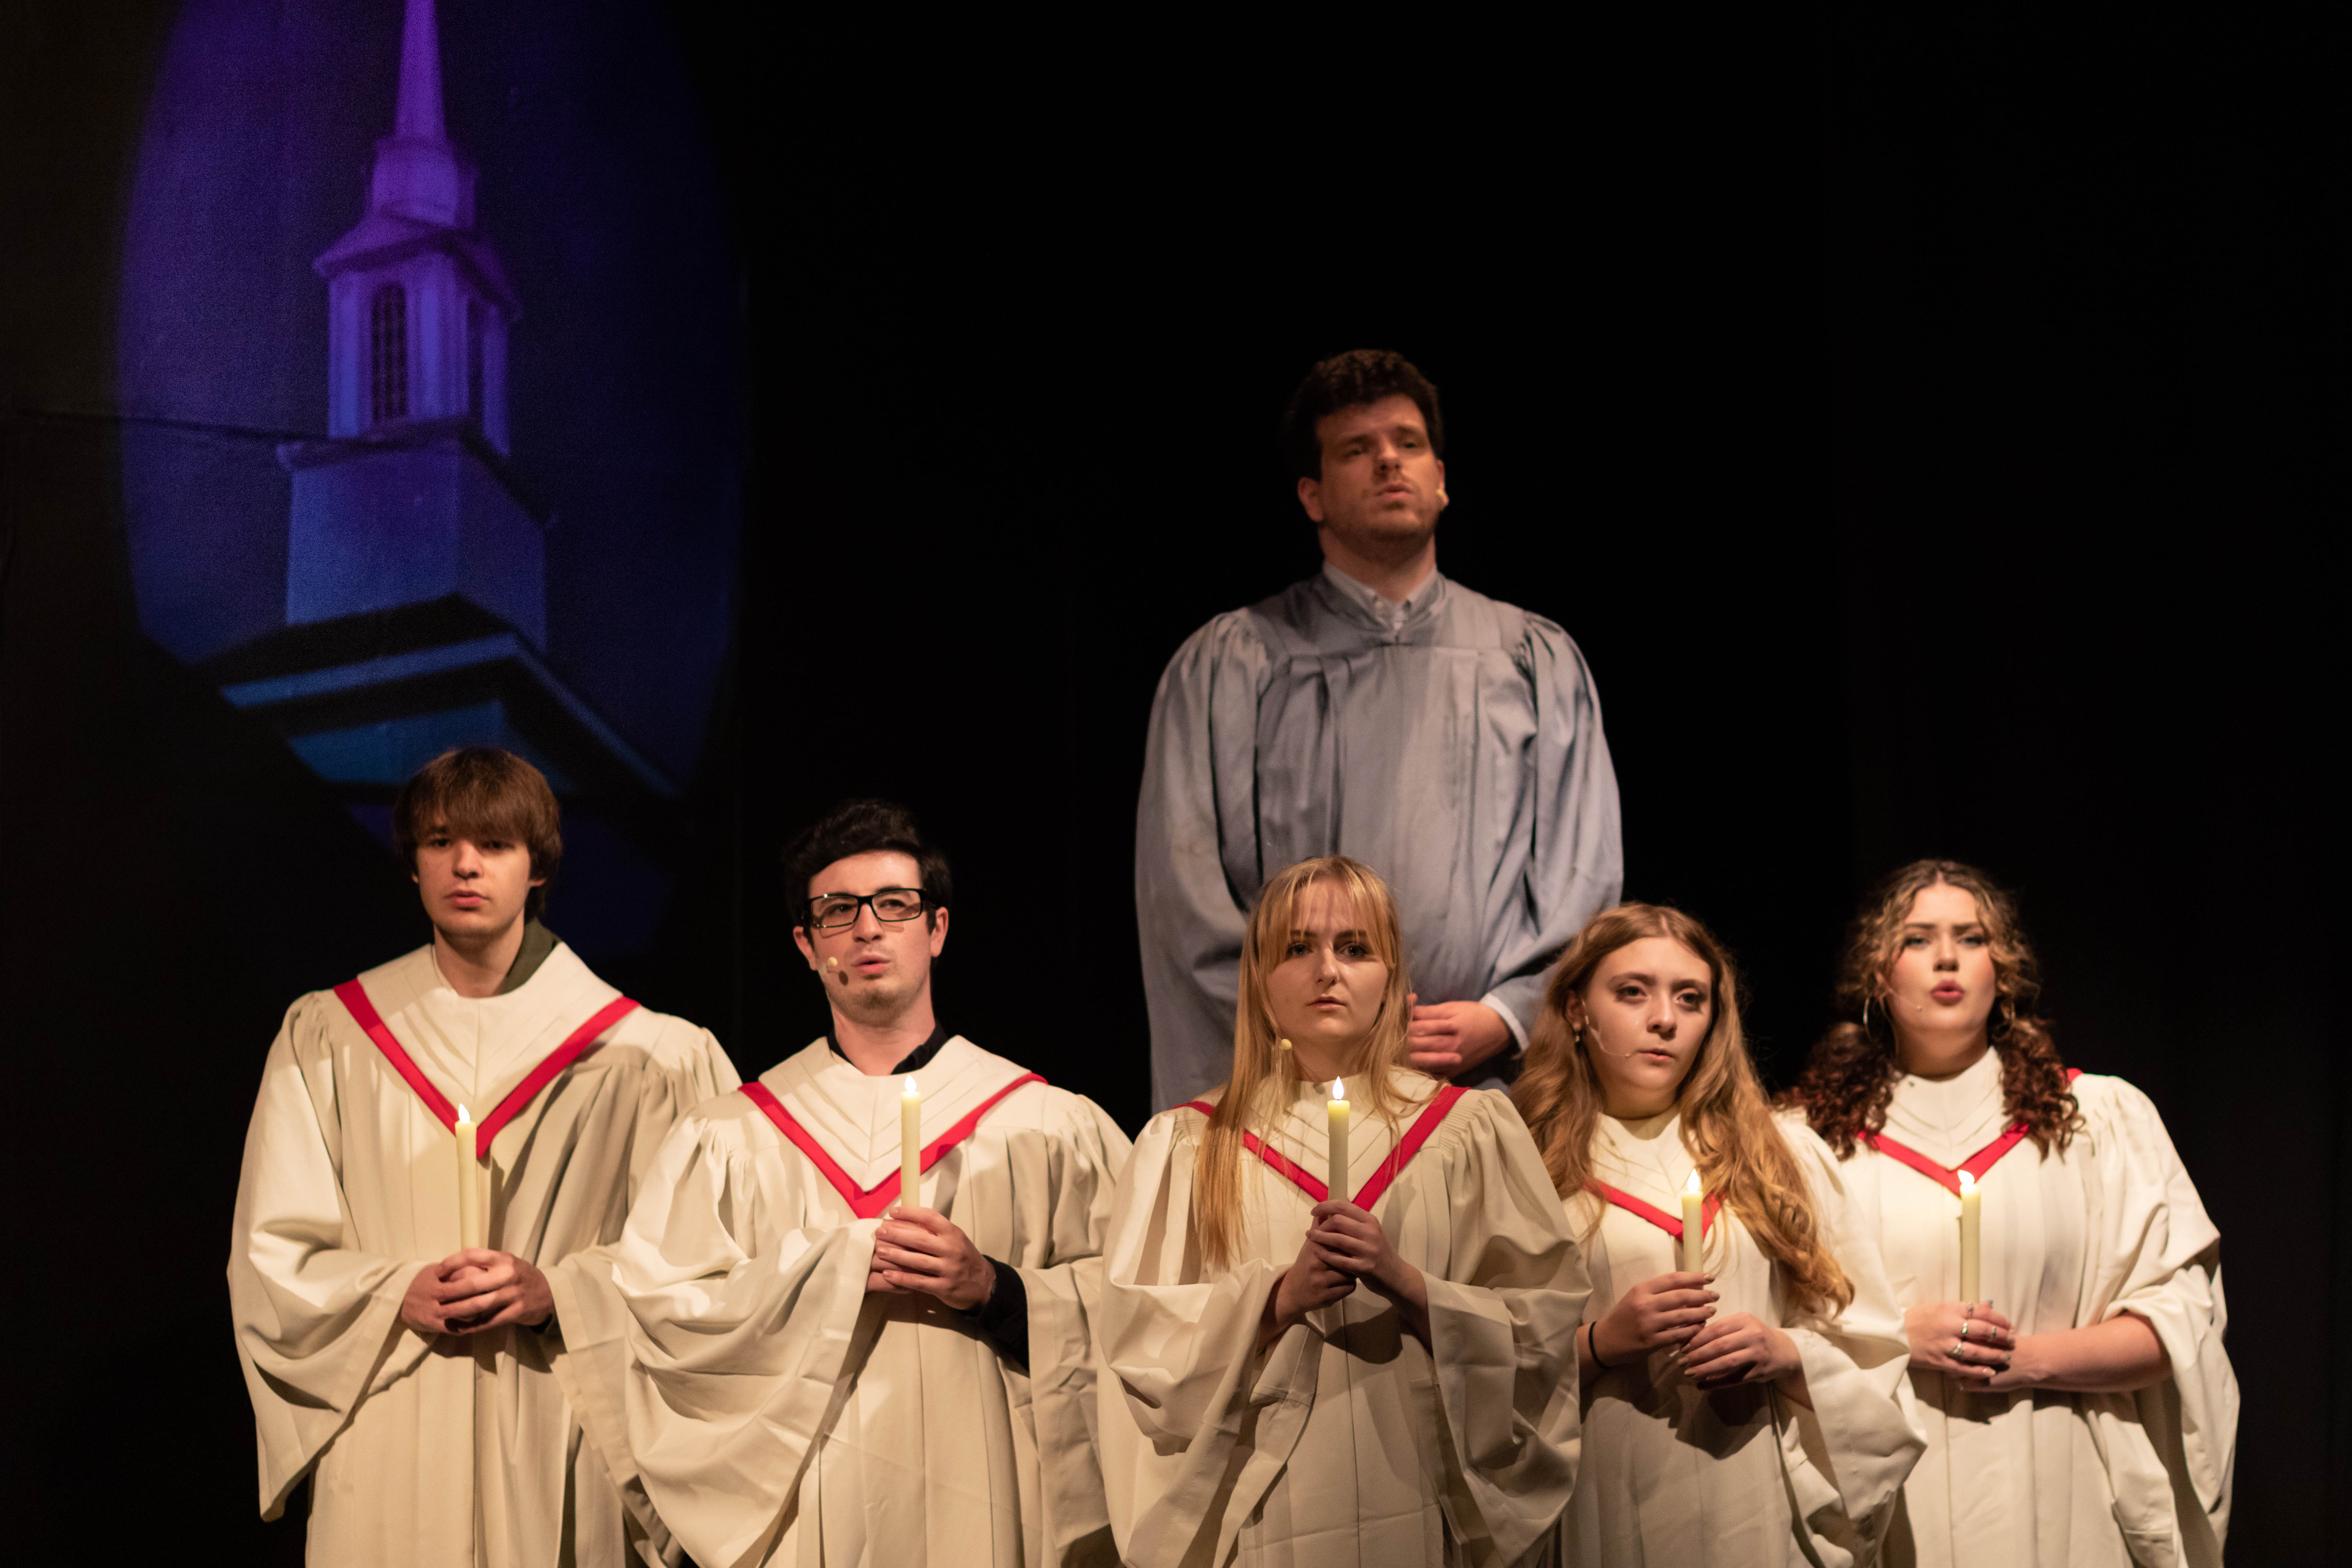 Karl Hinger as Rev. Bliss with the cast of CARRIE: THE MUSICAL (Photo: Trish Haldin) 